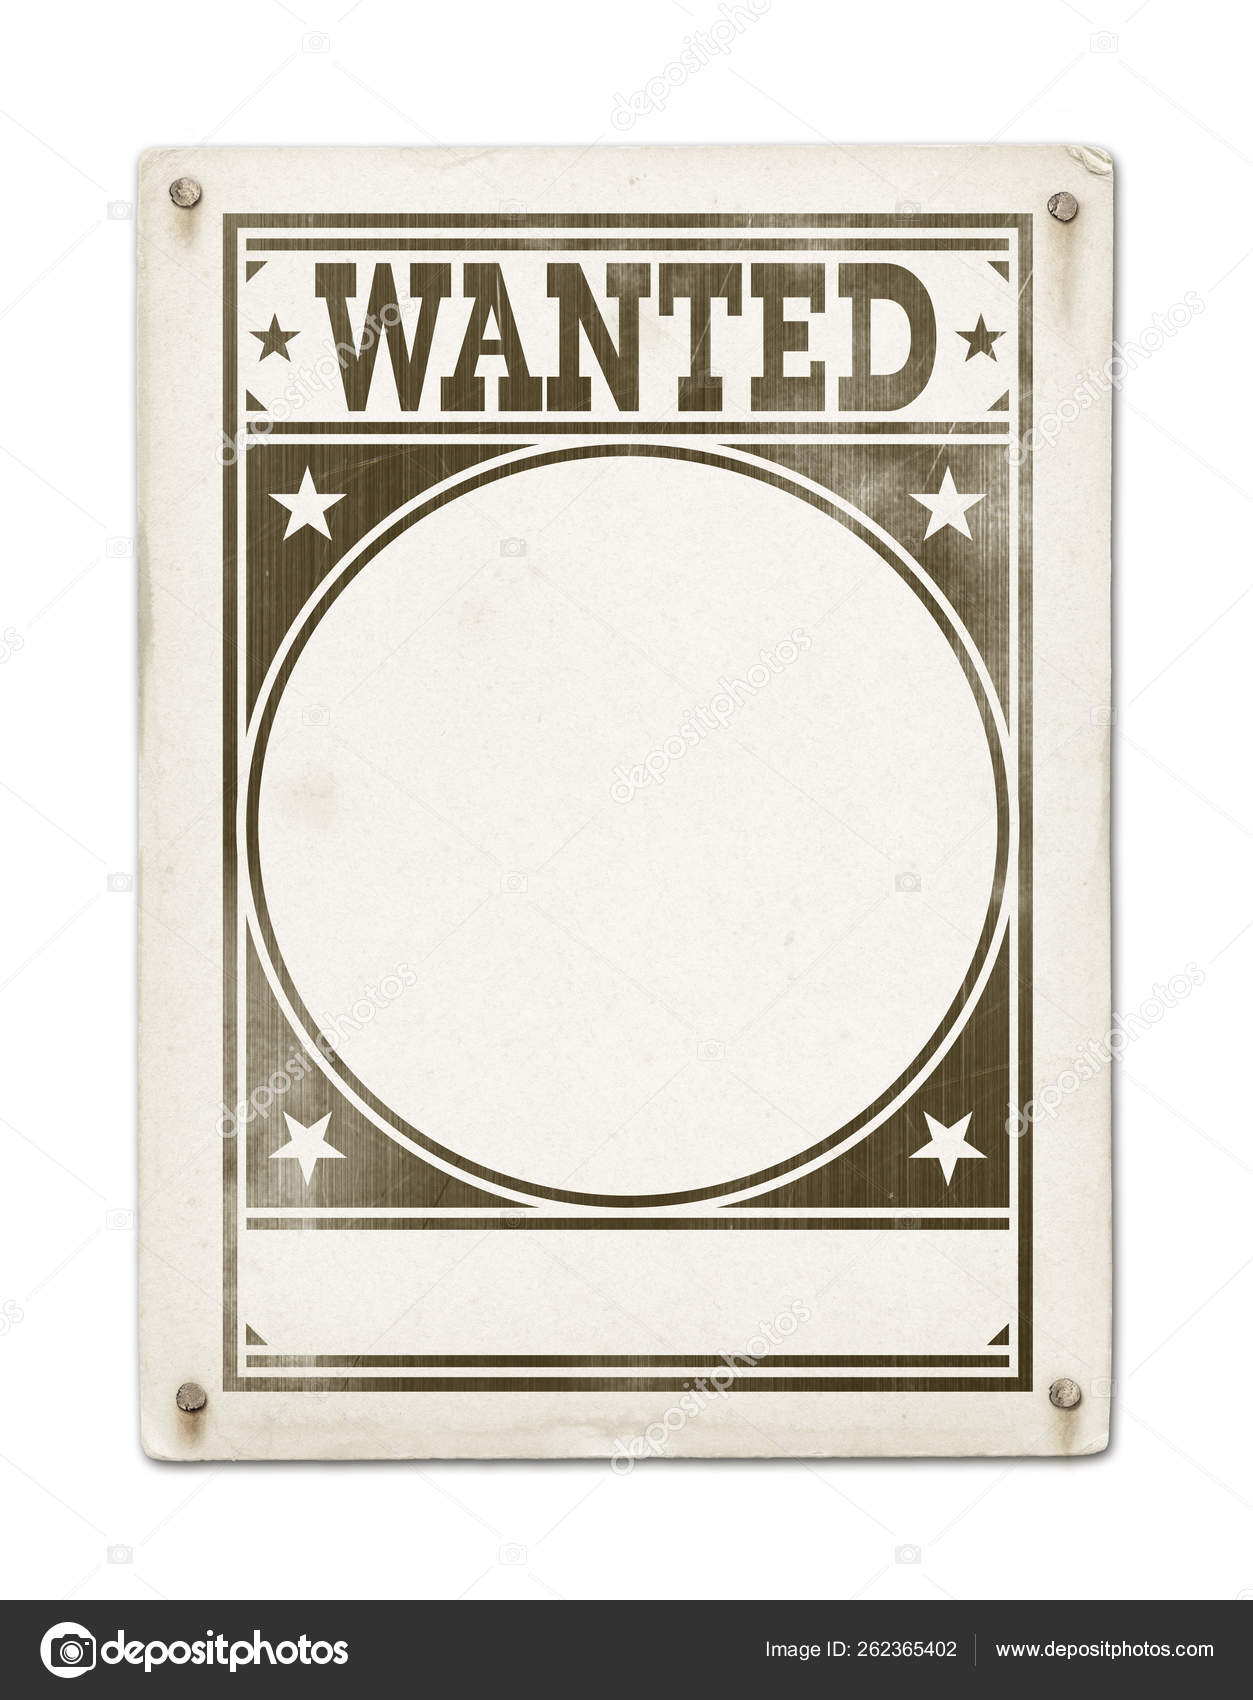 Wanted poster template Stock Photos, Royalty Free Wanted poster template  Images | Depositphotos